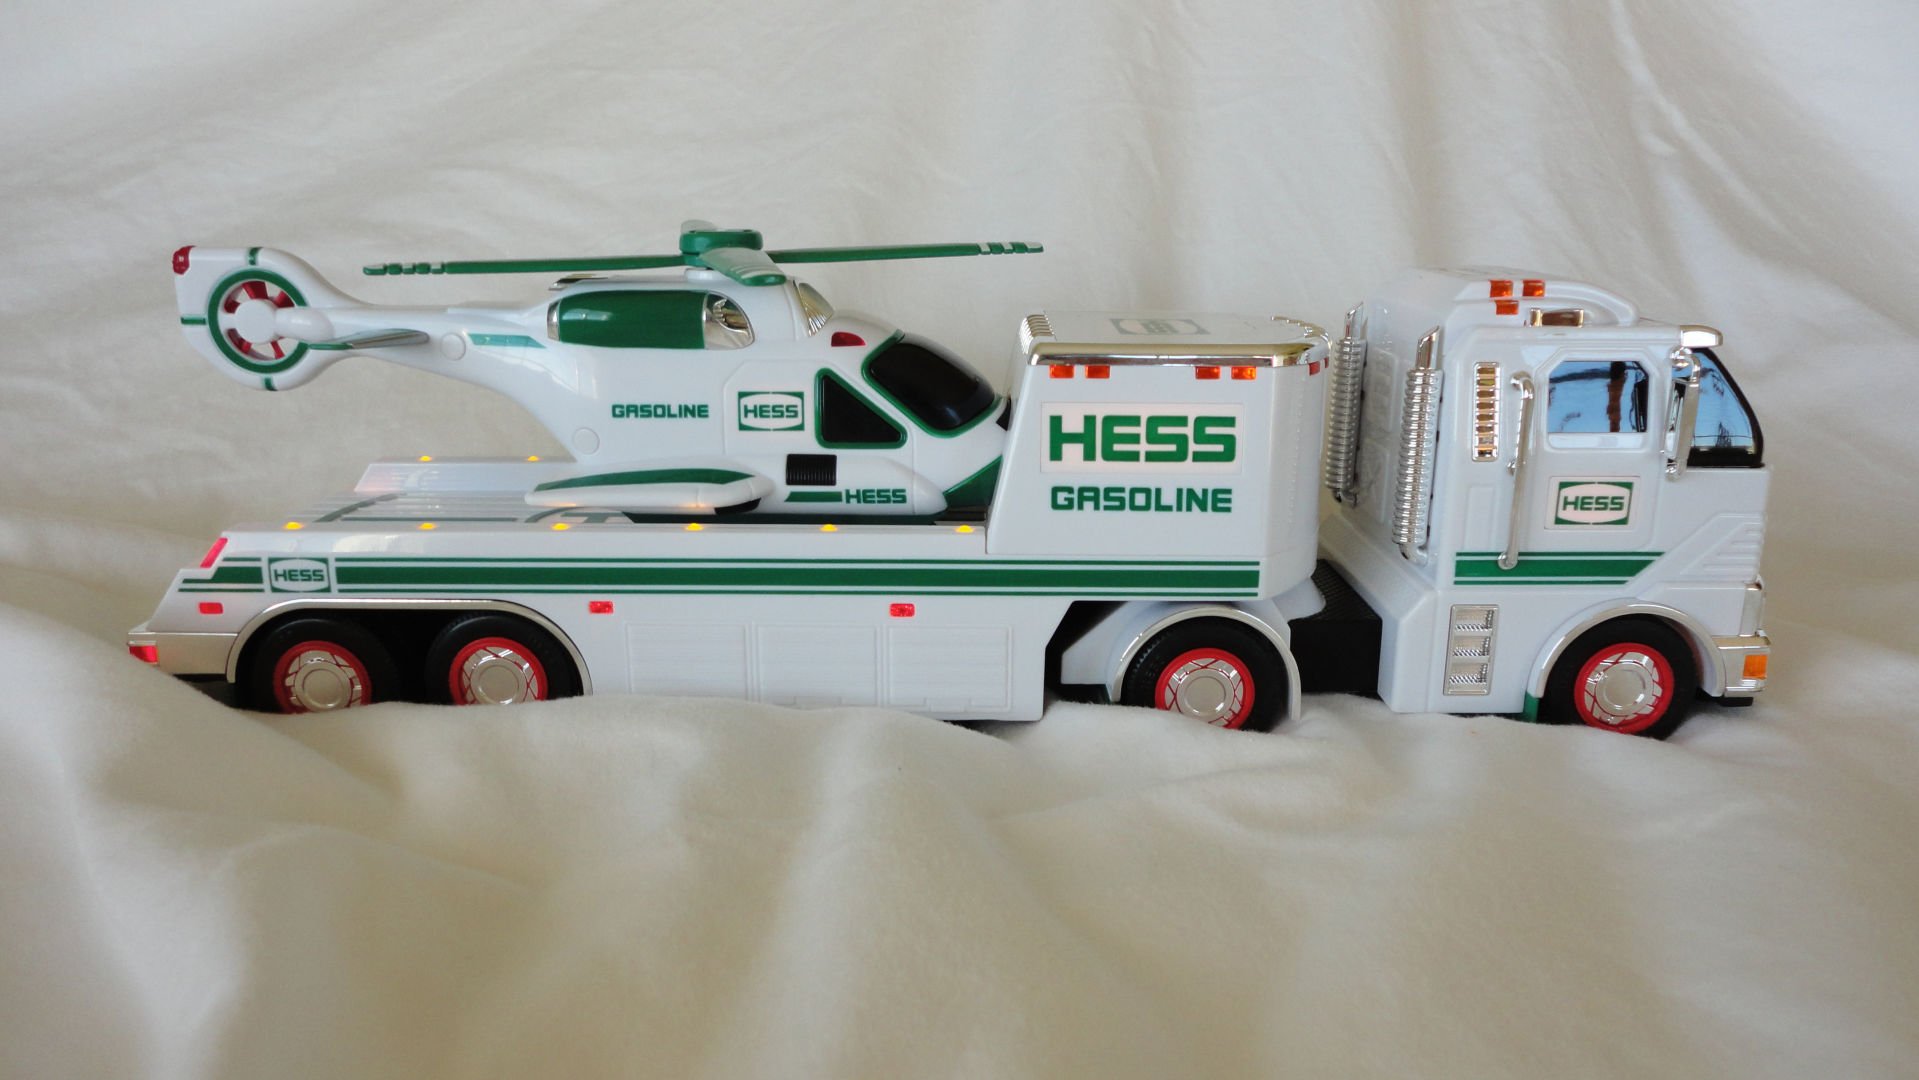 what are hess trucks worth today